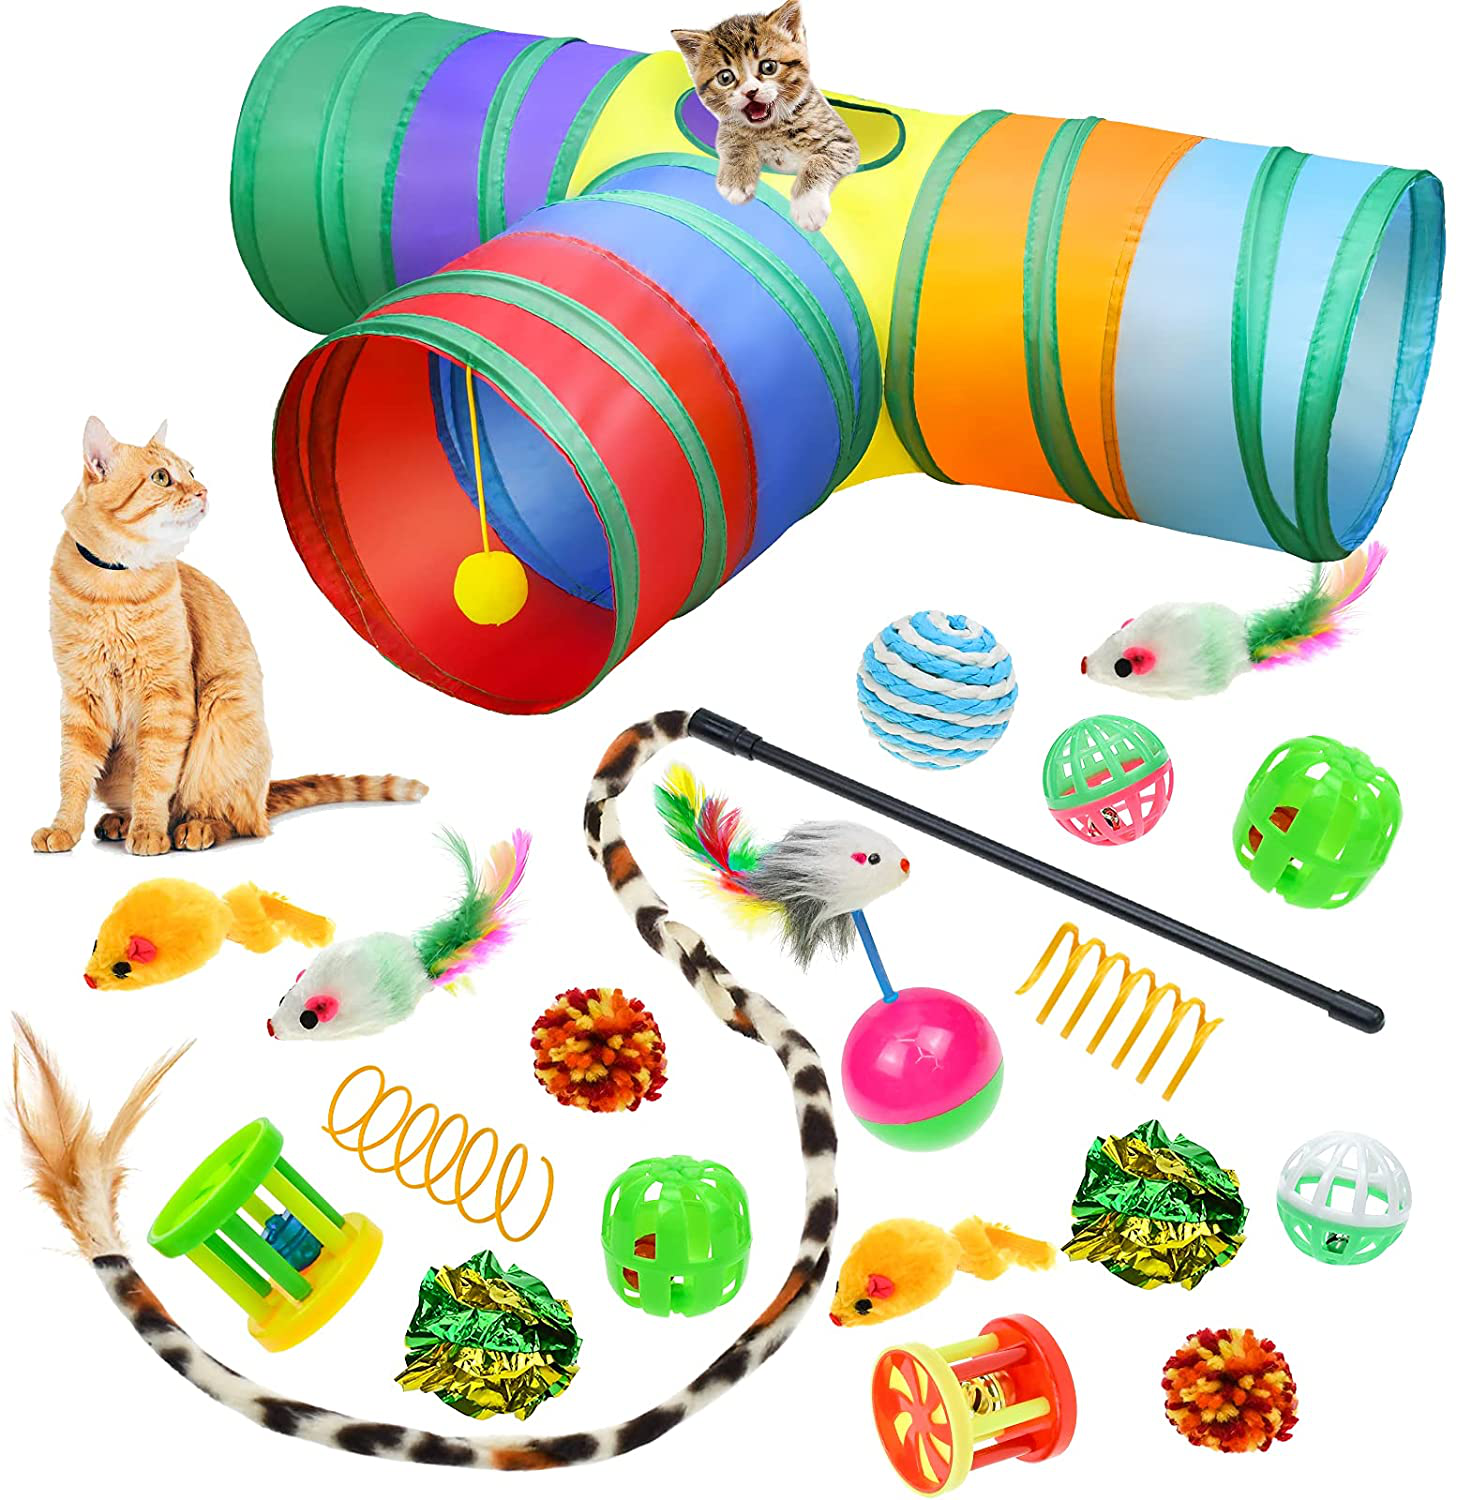 Malier 20 PCS Cat Kitten Toys Set, Collapsible Cat Tunnels for Indoor Cats, Interactive Cat Feather Toy Fluffy Mouse Crinkle Balls Cat 3 Way Tube Tunnel Toys for Cat Puppy Kitty Kitten